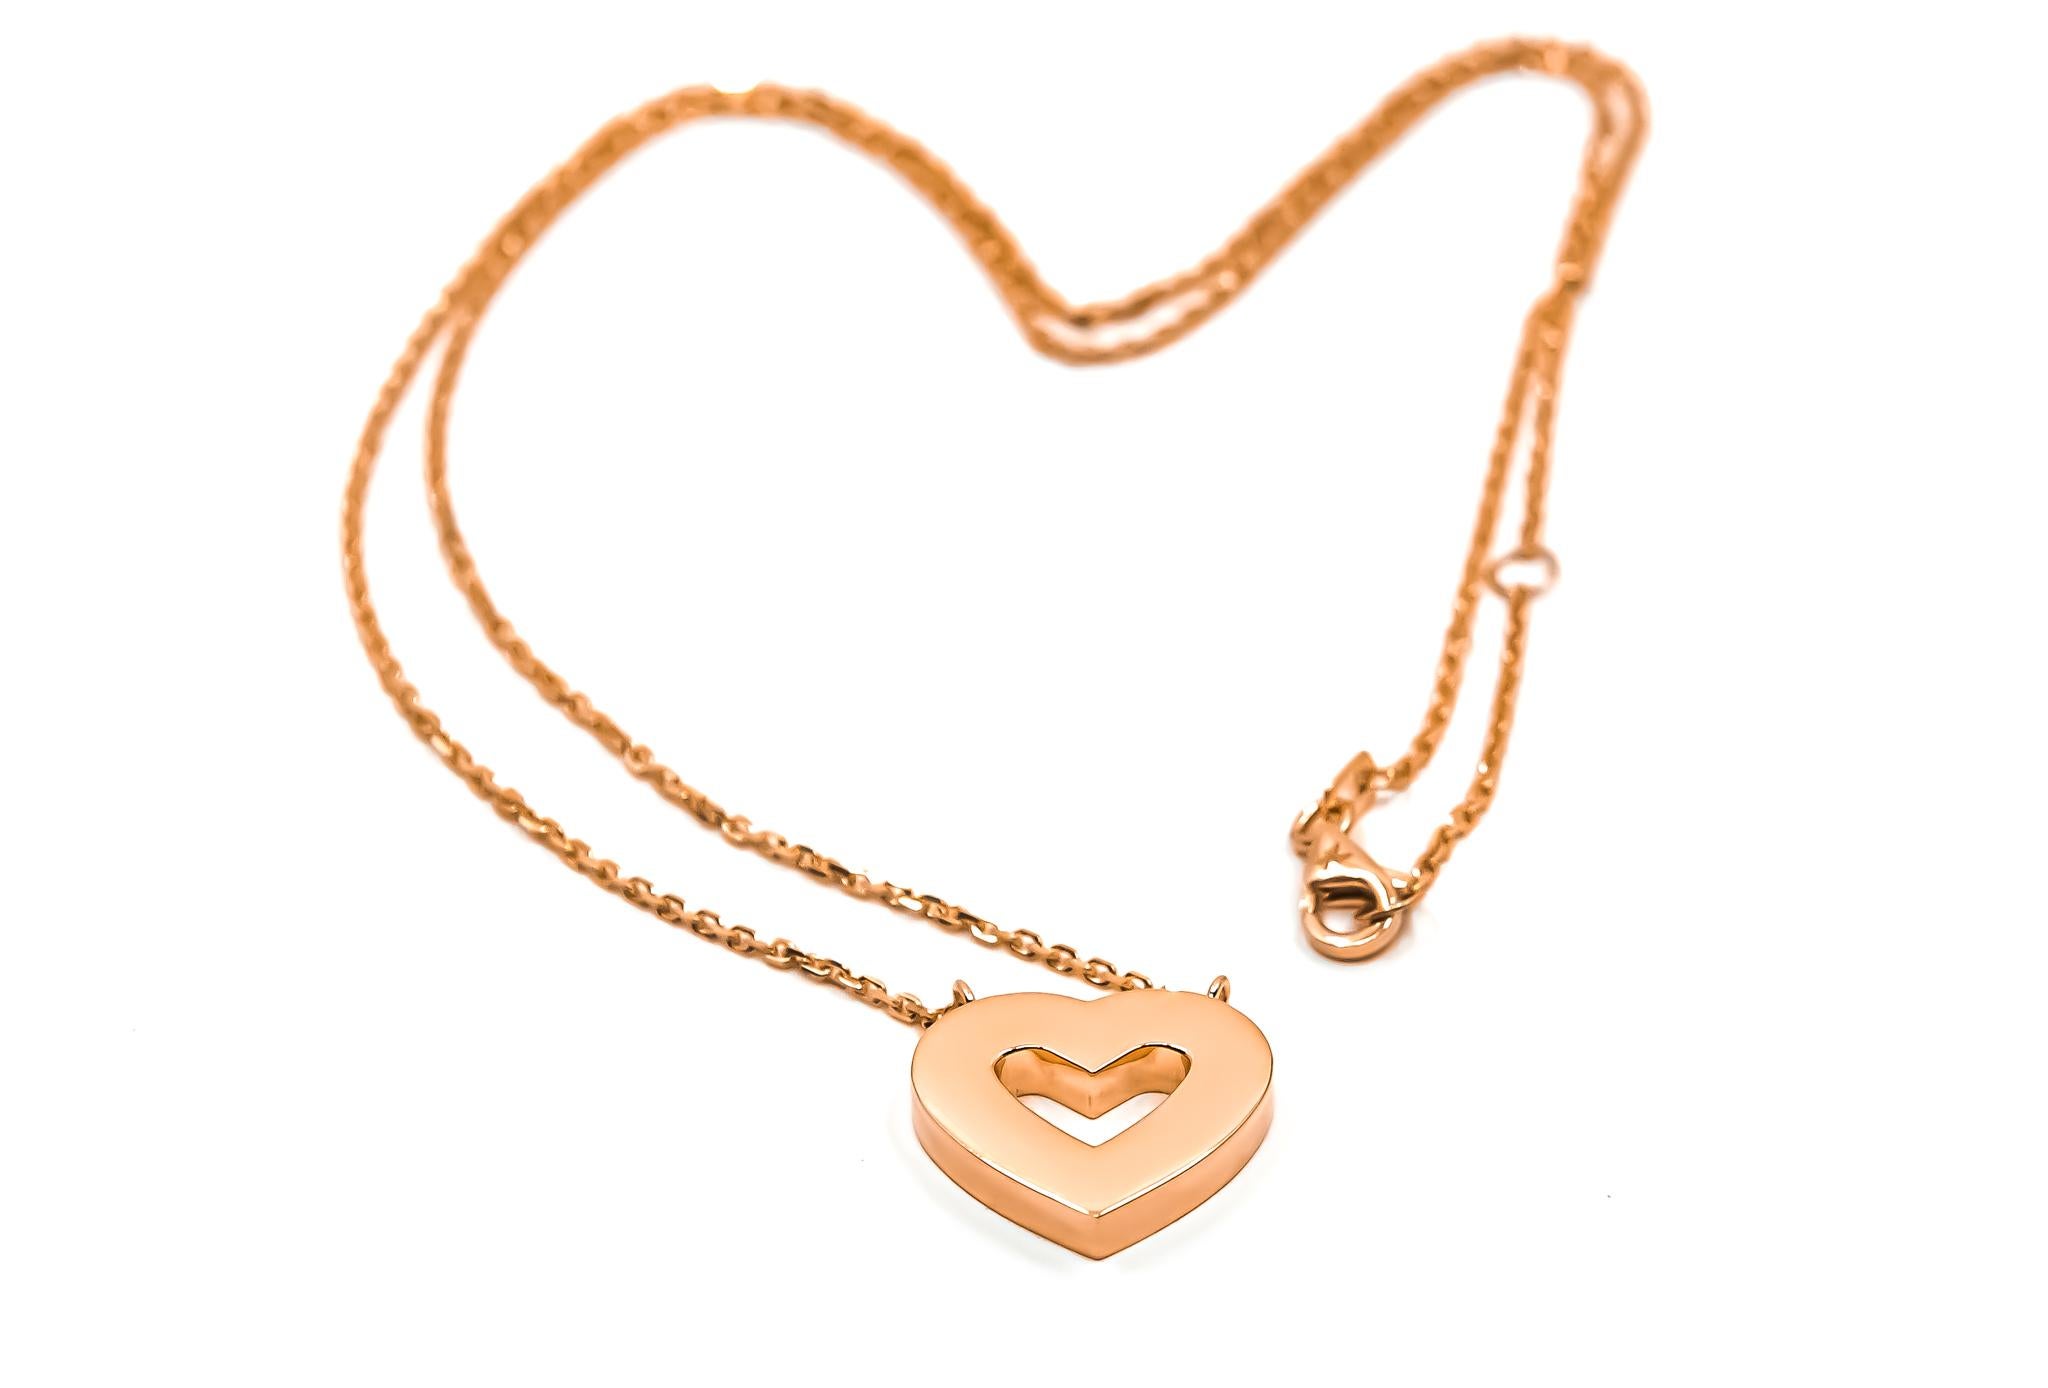 18kt solid rose gold pendant necklace by Mohamad Kamra from the Heart Collection.